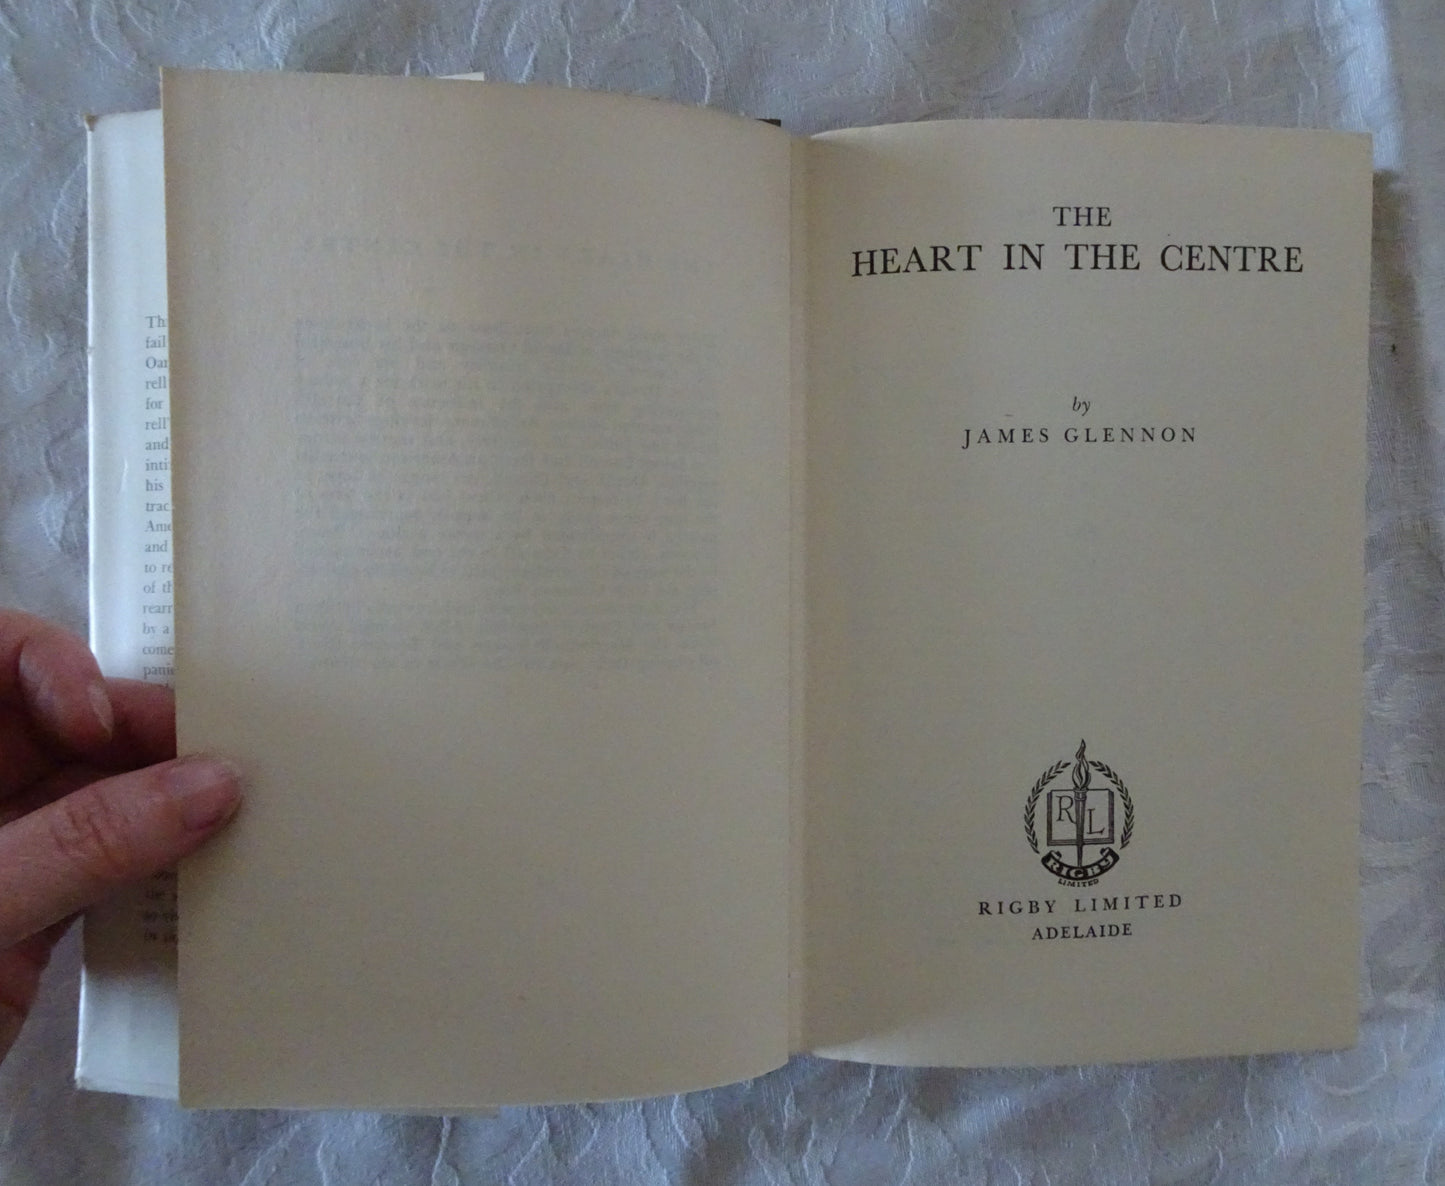 The Heart in the Centre by James Glennon